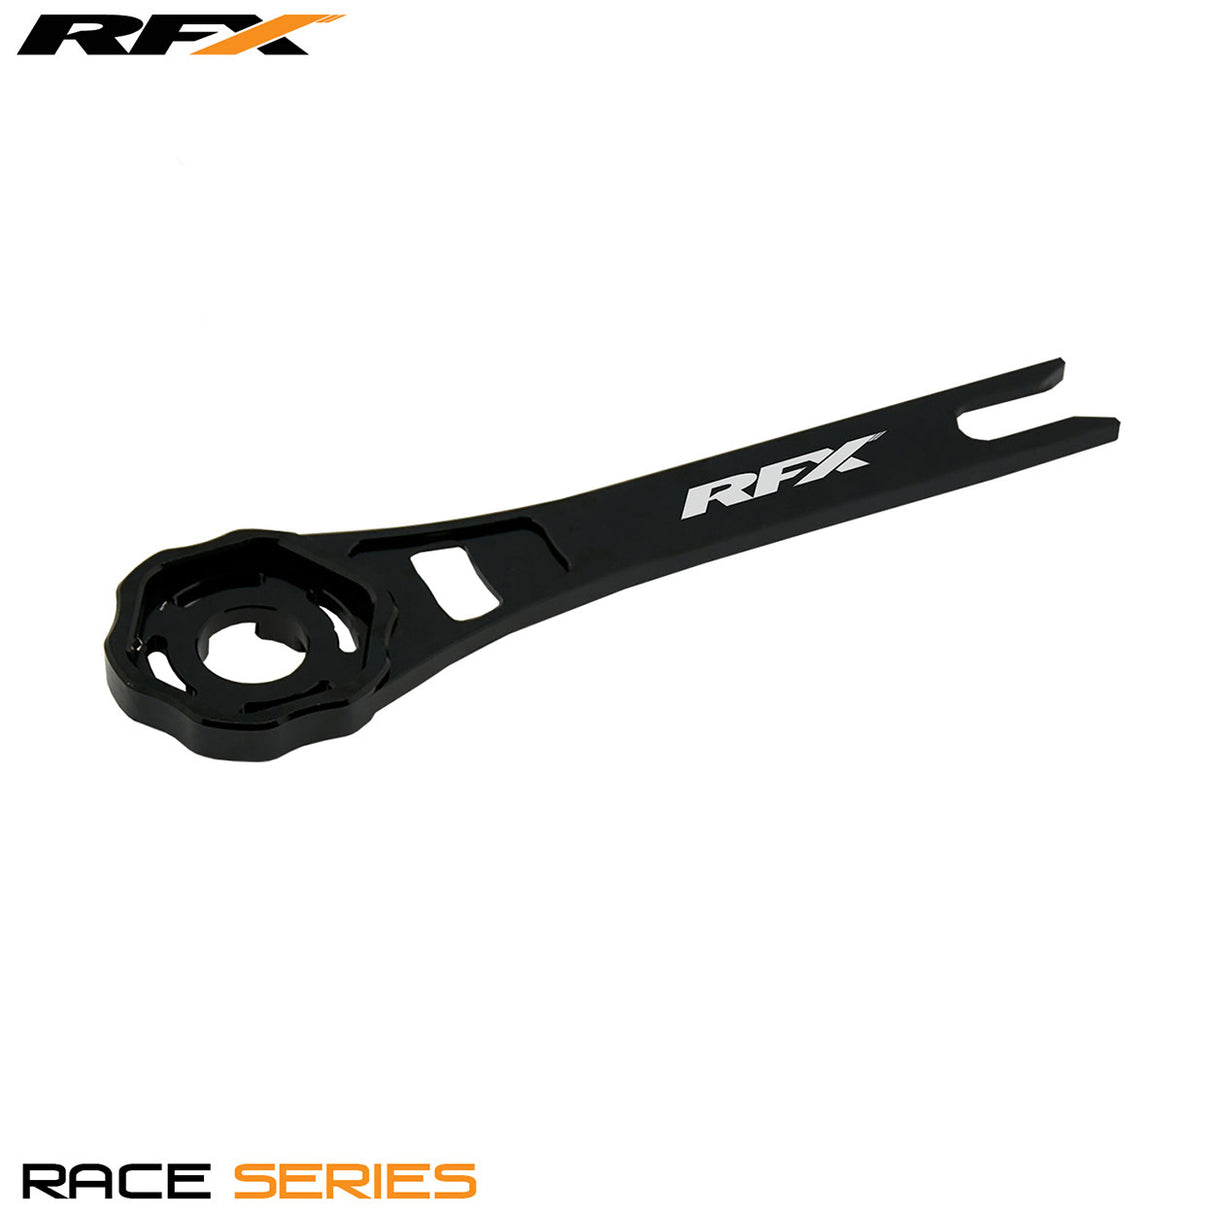 RFX Race Series Combination Fork Tool KTM Cartridge Forks SX/SXF 07-16 (Not EXC or 4CS)